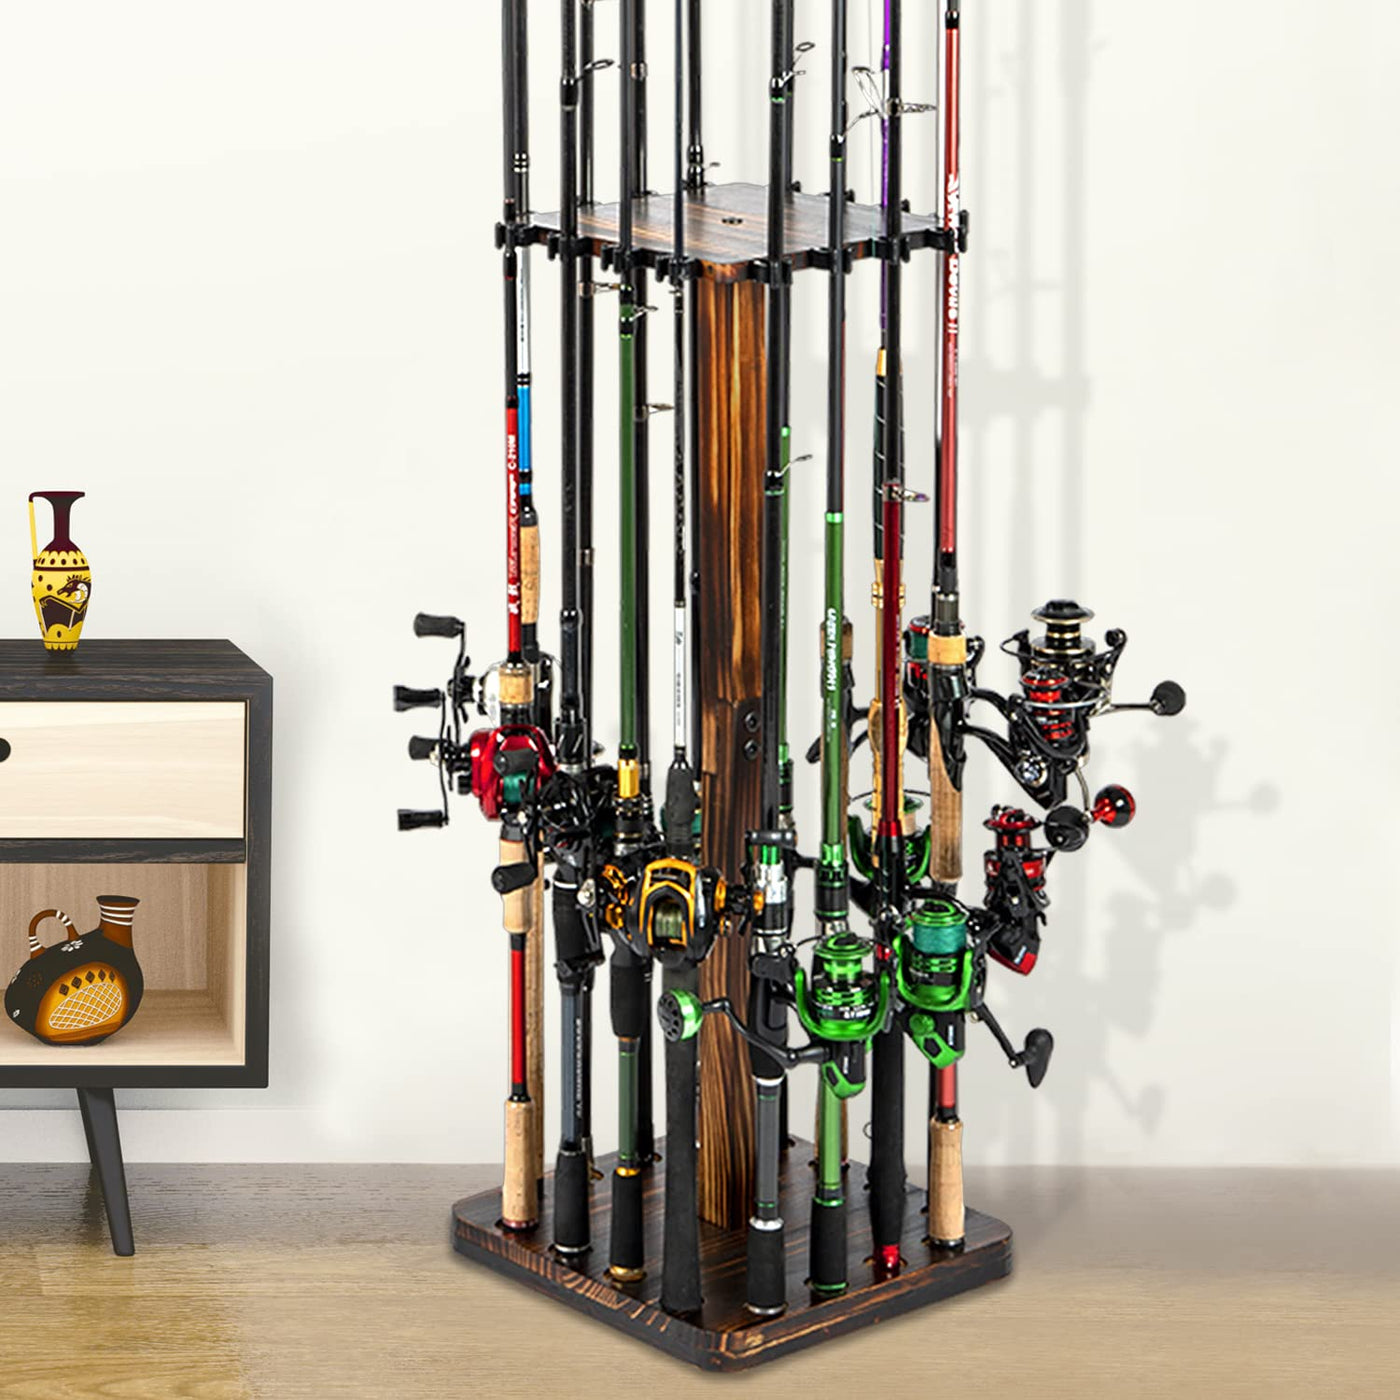 Fishing Rod Pole Holders Rack for Garage, 16 Fishing Rods Pole Floor Stand Wood Vertical Upright Fishing Gear Storage Unique Fishing Gifts for Men Women Christmas - Ghosthorn